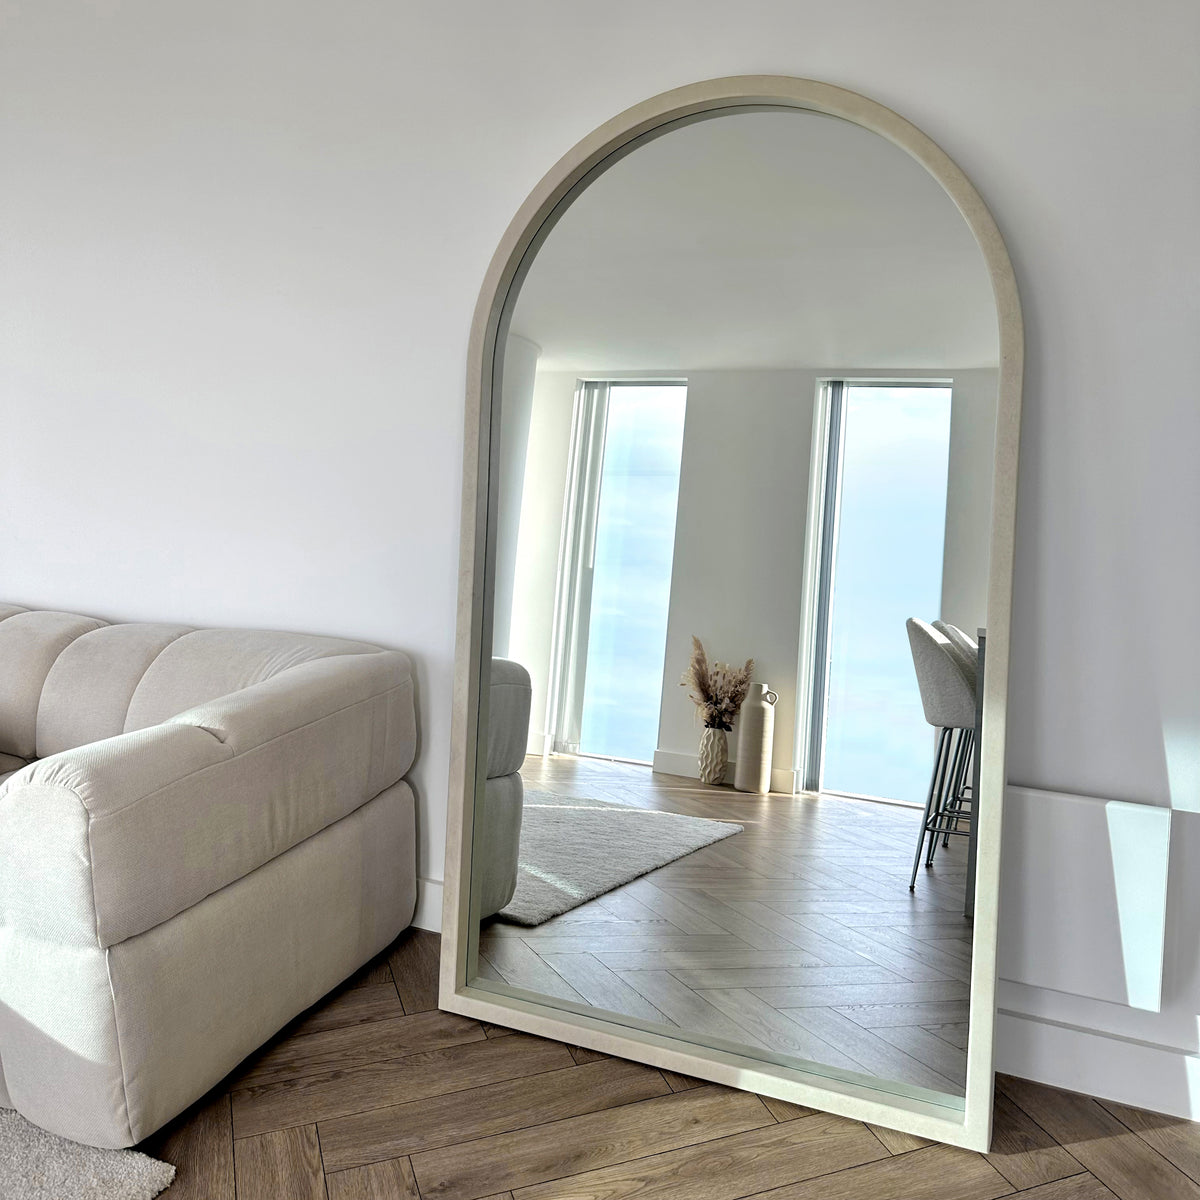 Full Length Extra Large Arched Concrete Mirror beside sofa